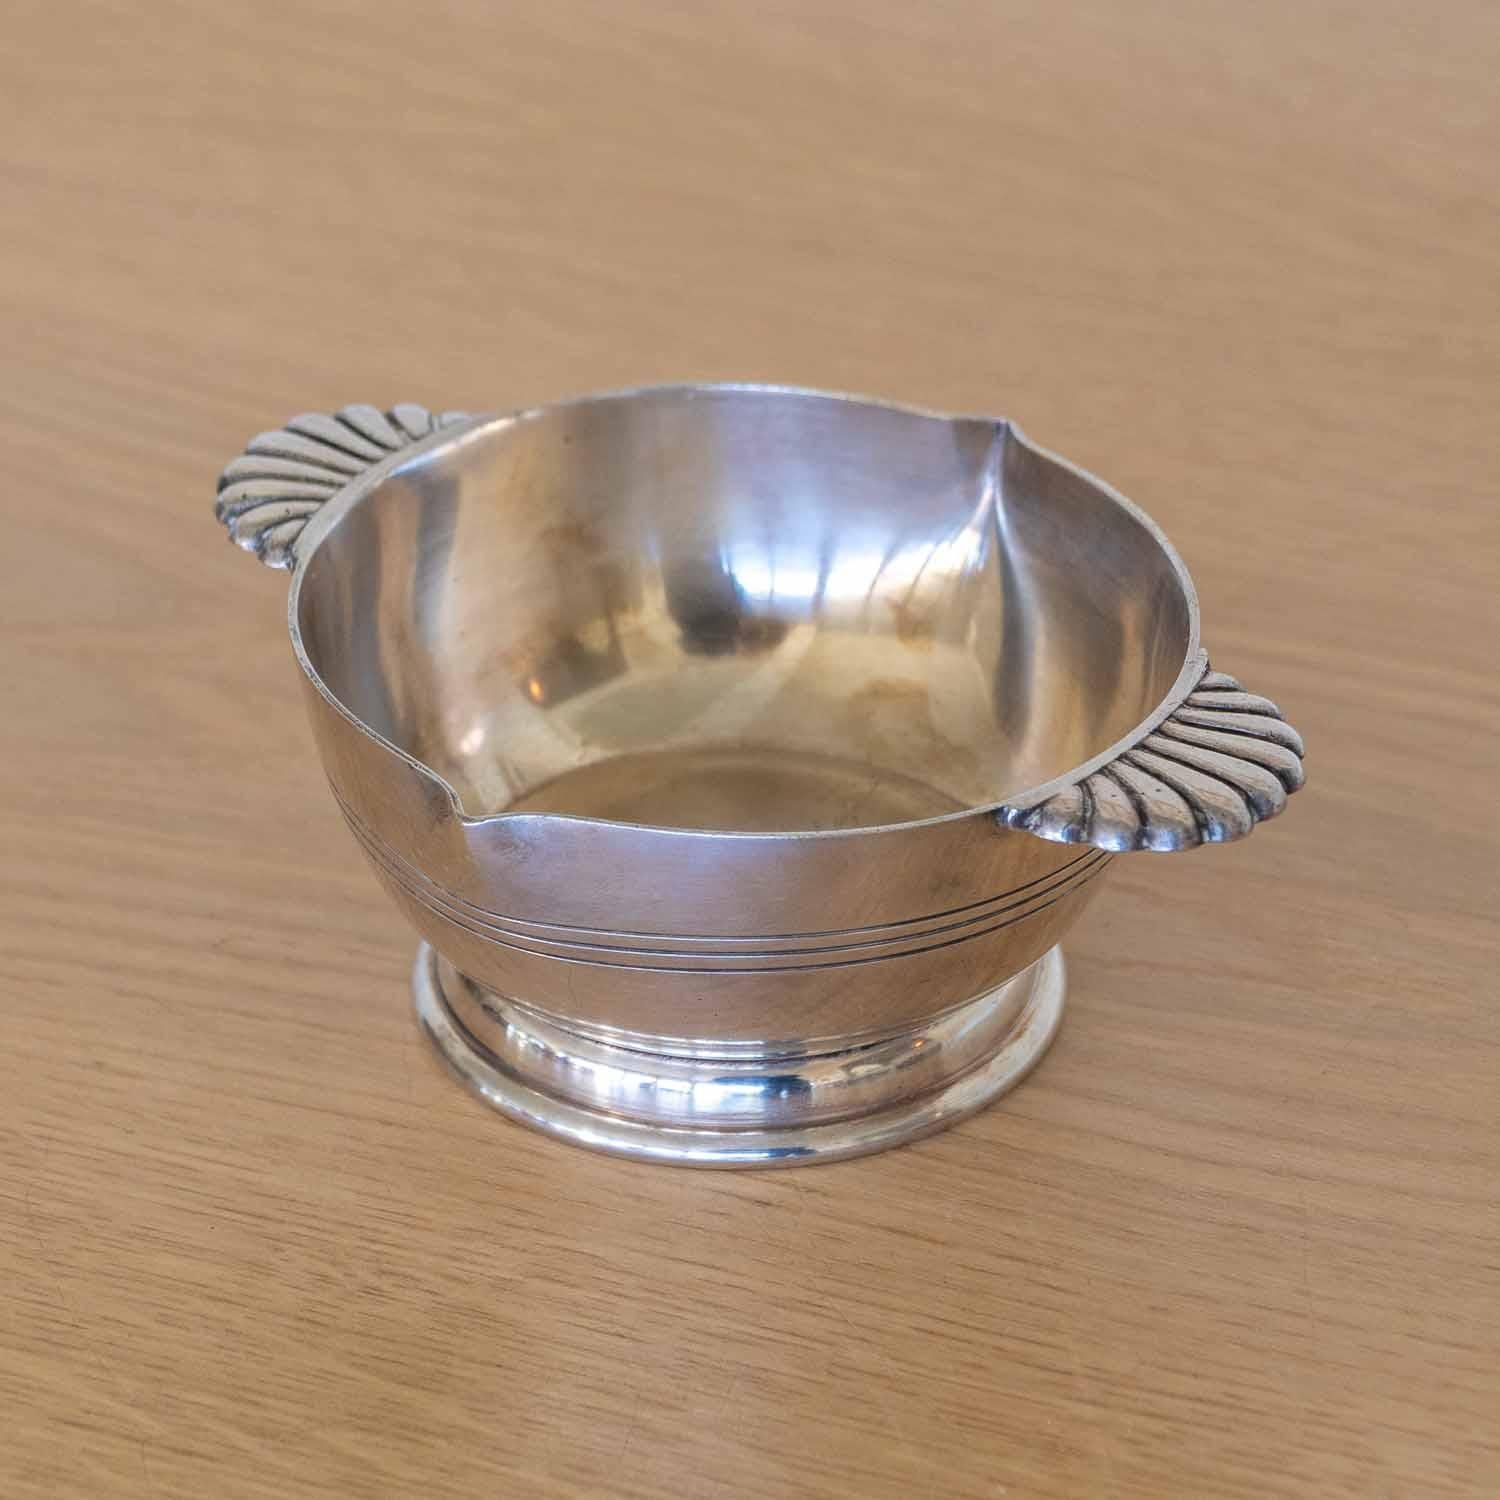 Beautiful Art Deco silver plated bowl from France, 1930's. Petite bowl with grooves around edge and lovely shell  detail on handles. Original finish shows great age and patina. Perfect as a decorative object or catchall. Stamped on underside. 